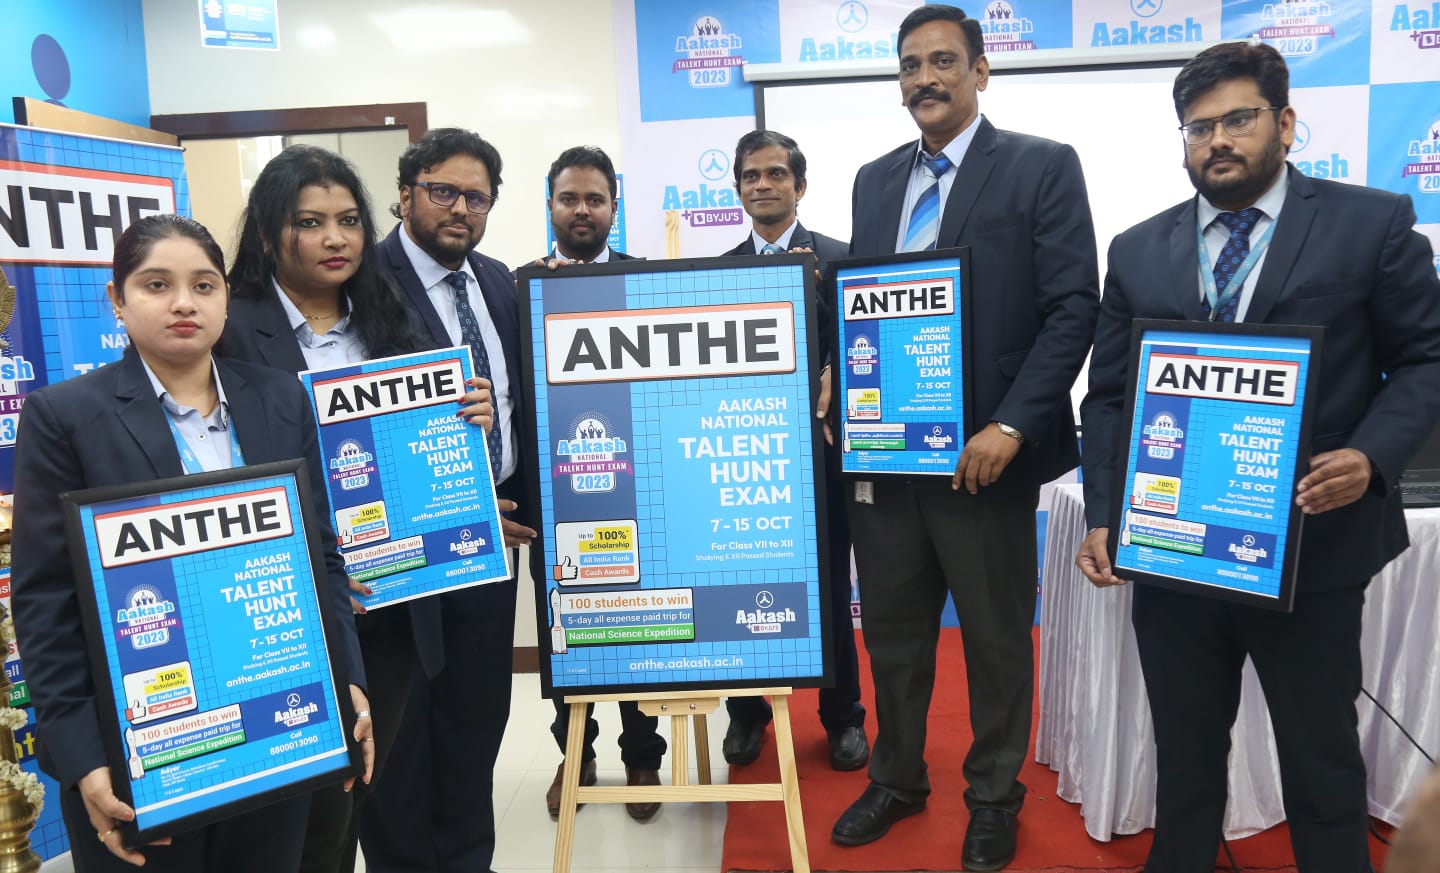 Aakash BYJU’S Launches its Biggest and Most Awaited National Talent Hunt Exam, ANTHE 2023; Offers Up to 100% Scholarship and Cash Awards to Class VII-XII Students